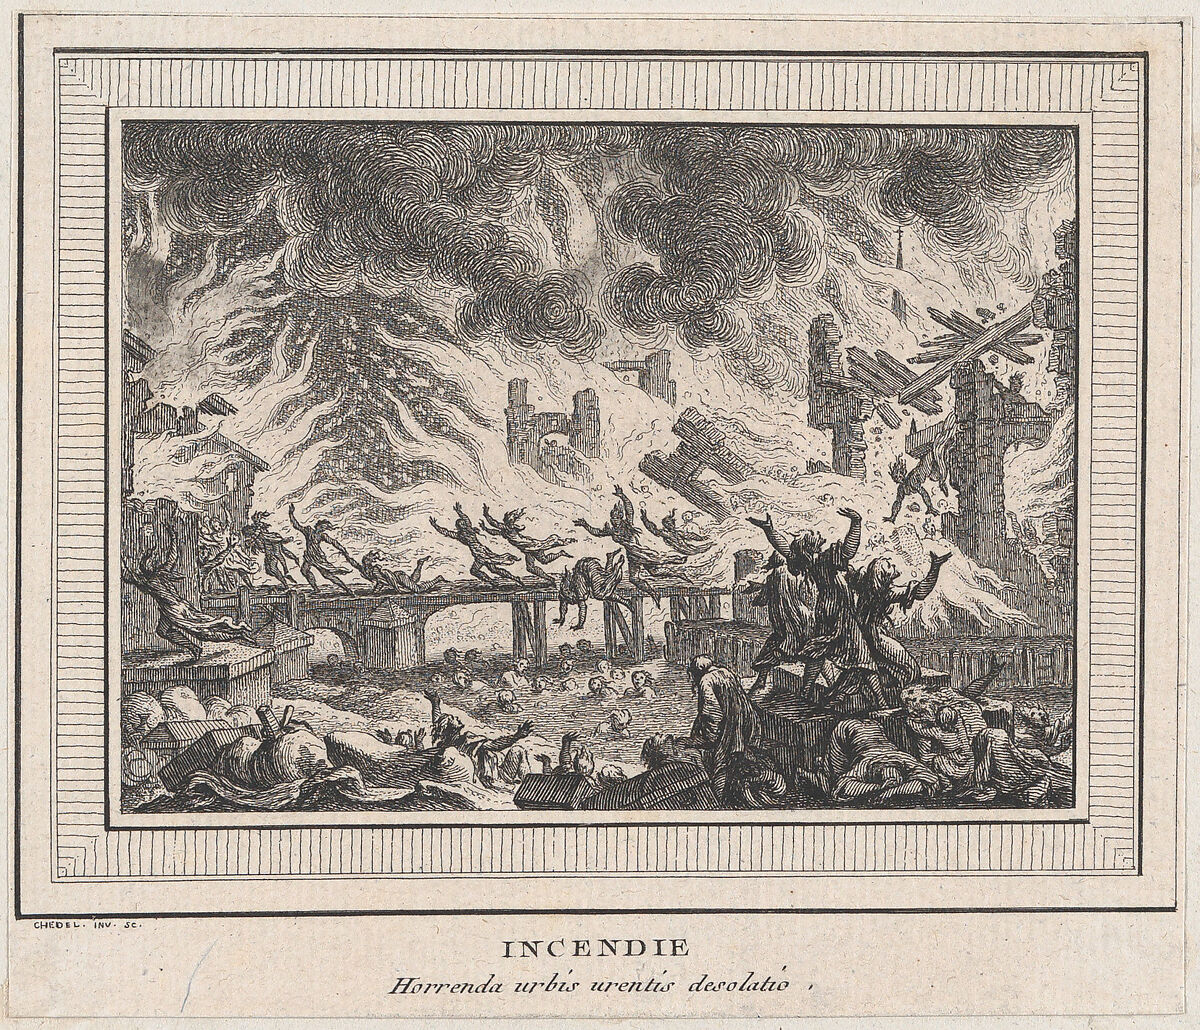 Incendie, Quentin Pierre Chedel (French, Châlons-en-Champagne 1705–1763 Châlons-en-Champagne), Etching 